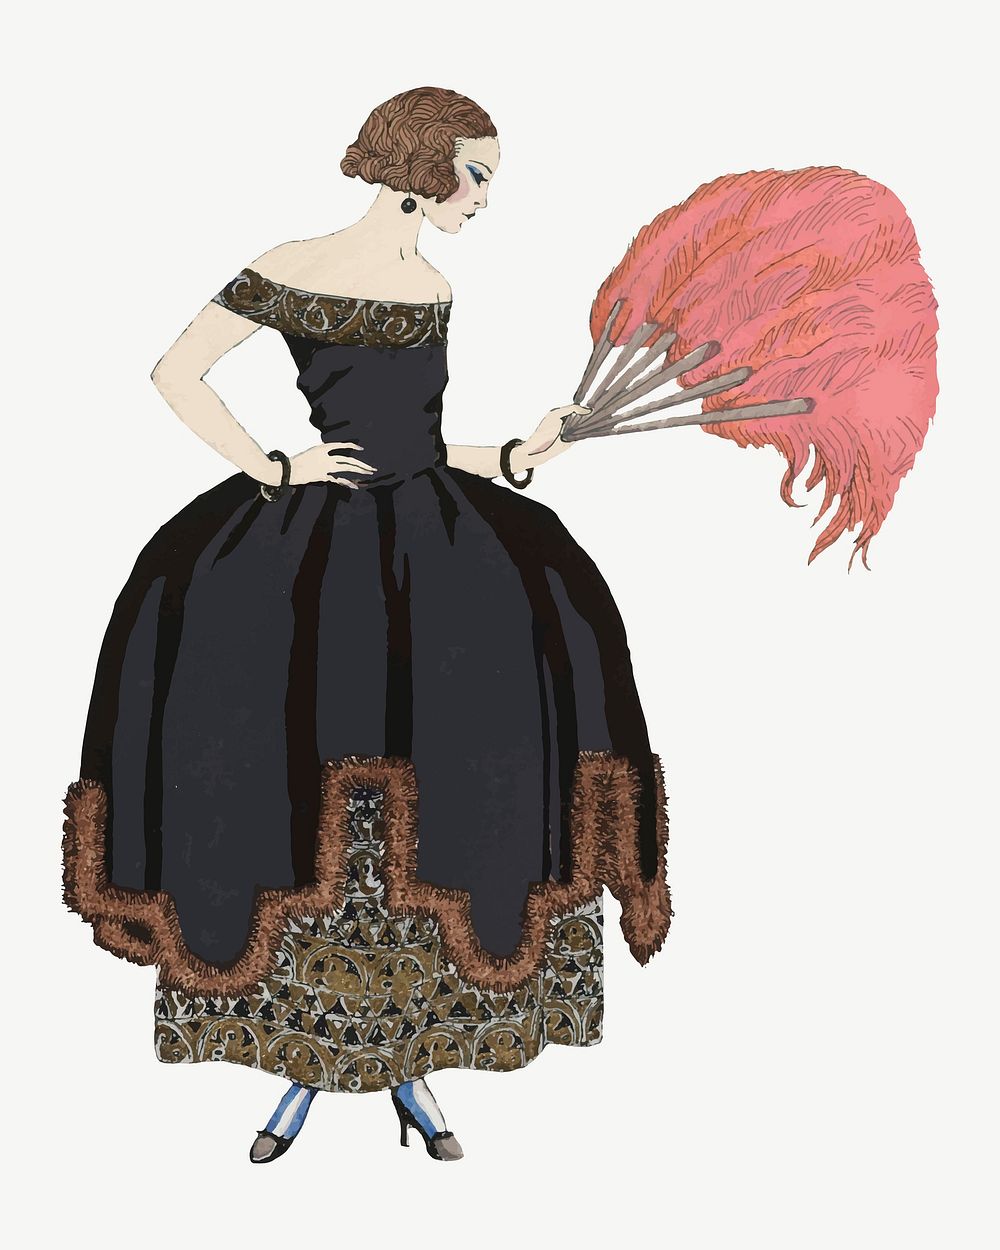 Black Victorian dress fashion vector, remix from artworks by George Barbier